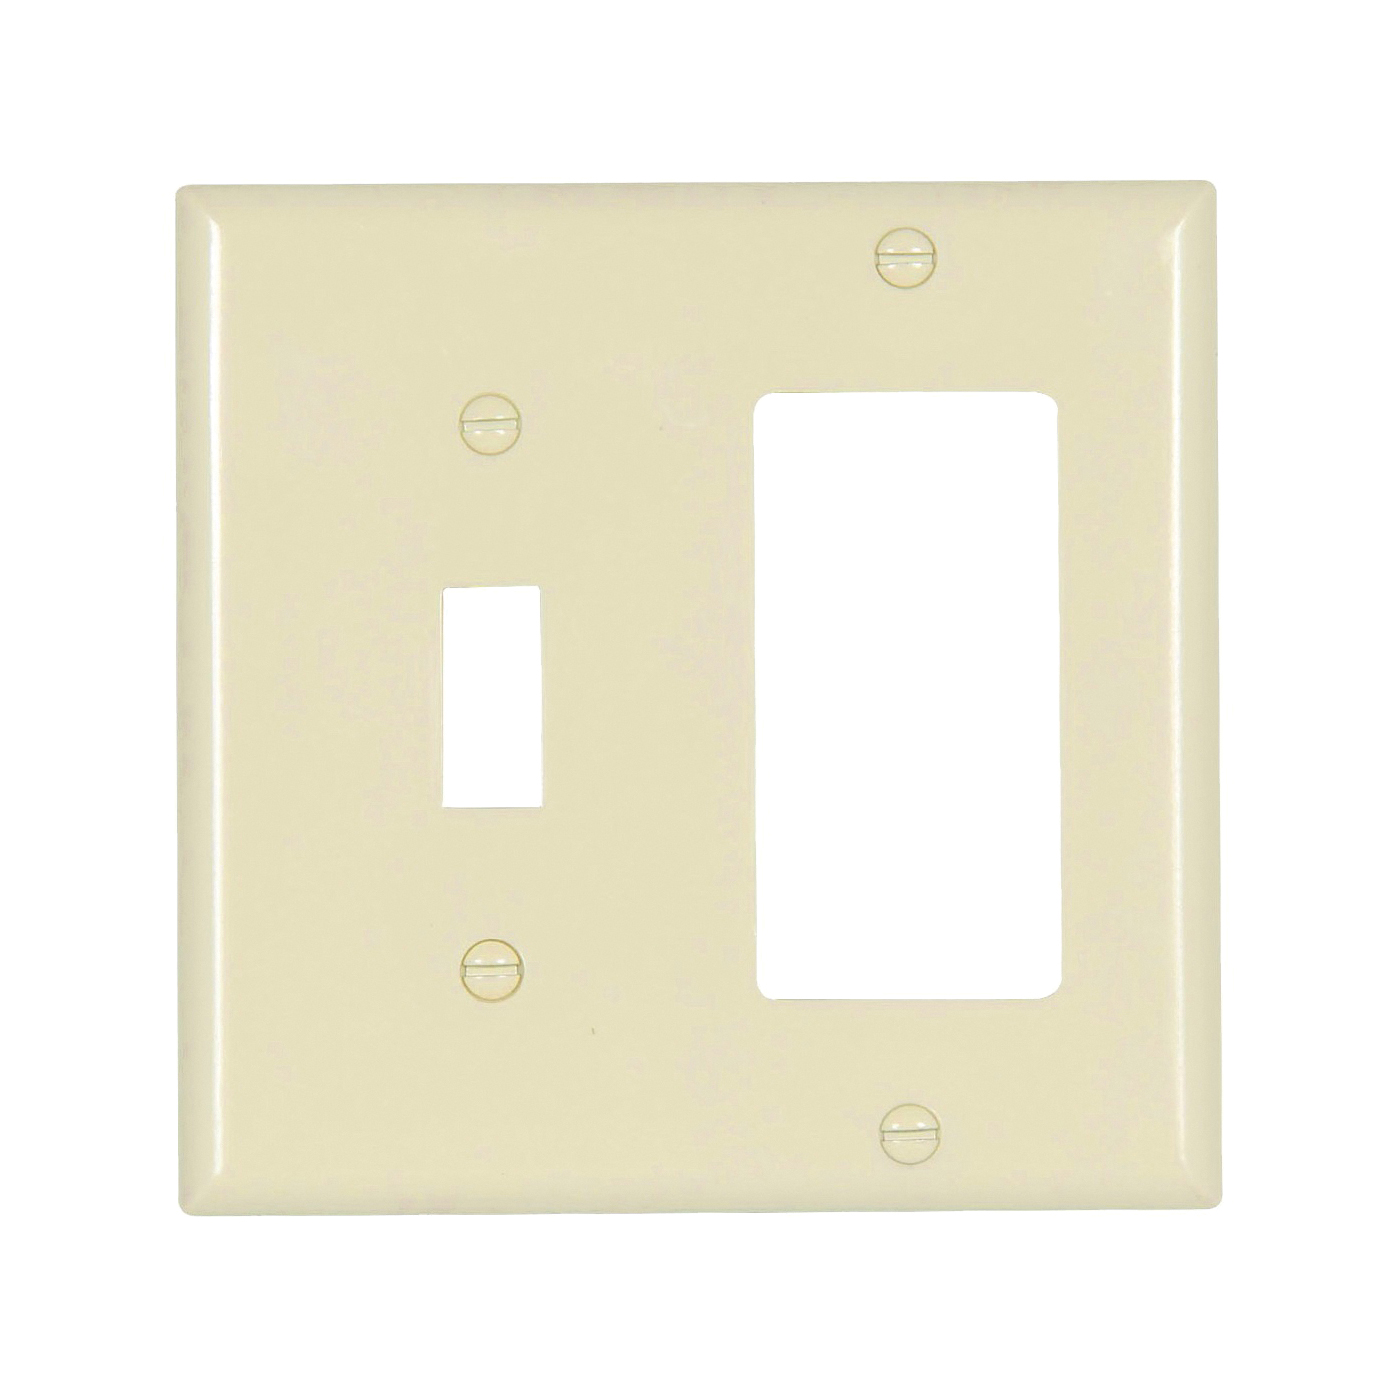 2153LA-BOX Combination Wallplate, 4-1/2 in L, 4-9/16 in W, 2 -Gang, Thermoset, Light Almond